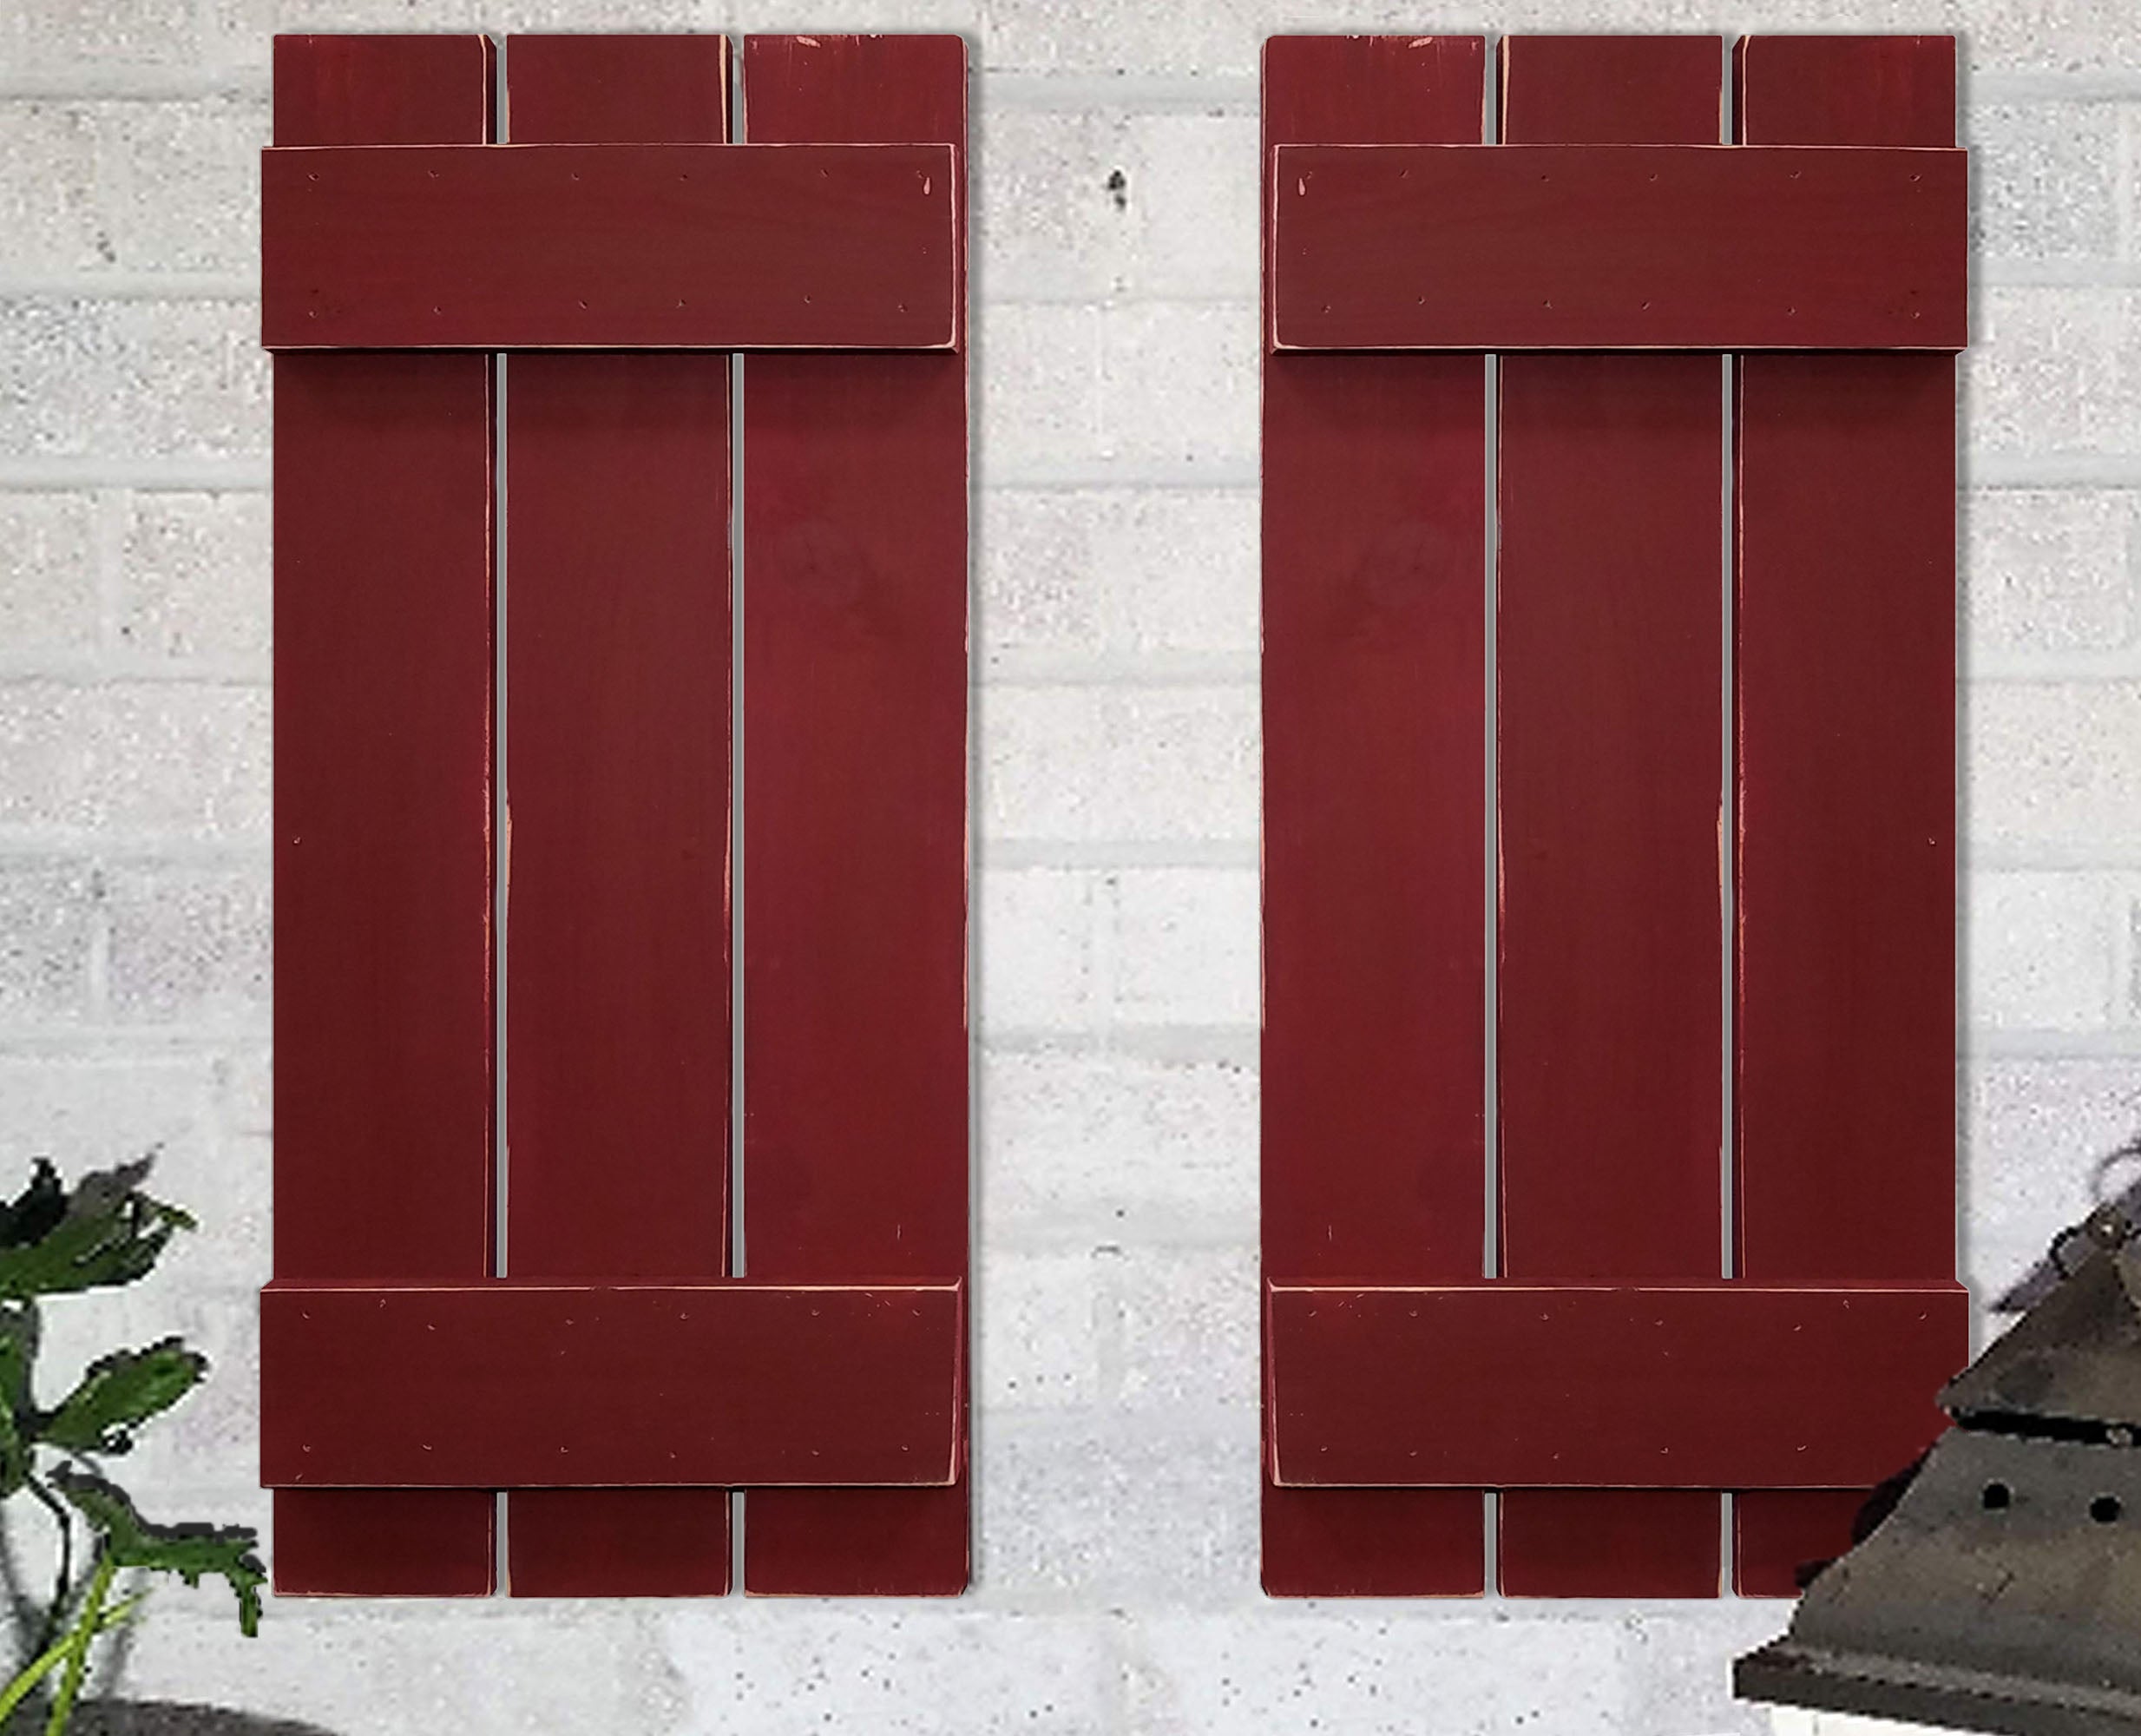 Board & Batten Shutters - 20 Paint Colors, Shown in Sundried Tomato Red